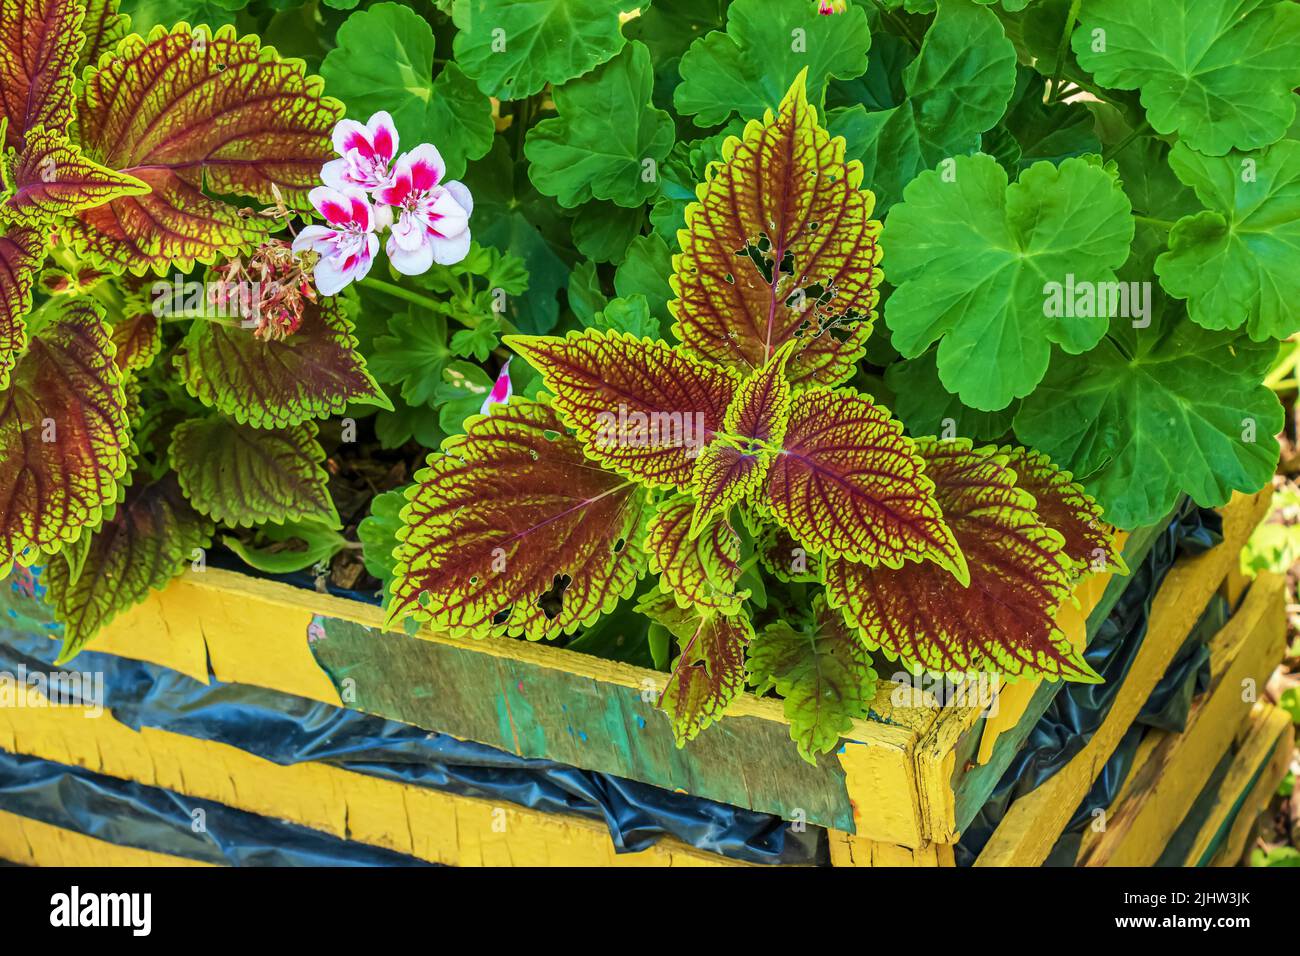 Close-up view of a beautiful begonia with dark green textured foliage in a pot. Stock Photo